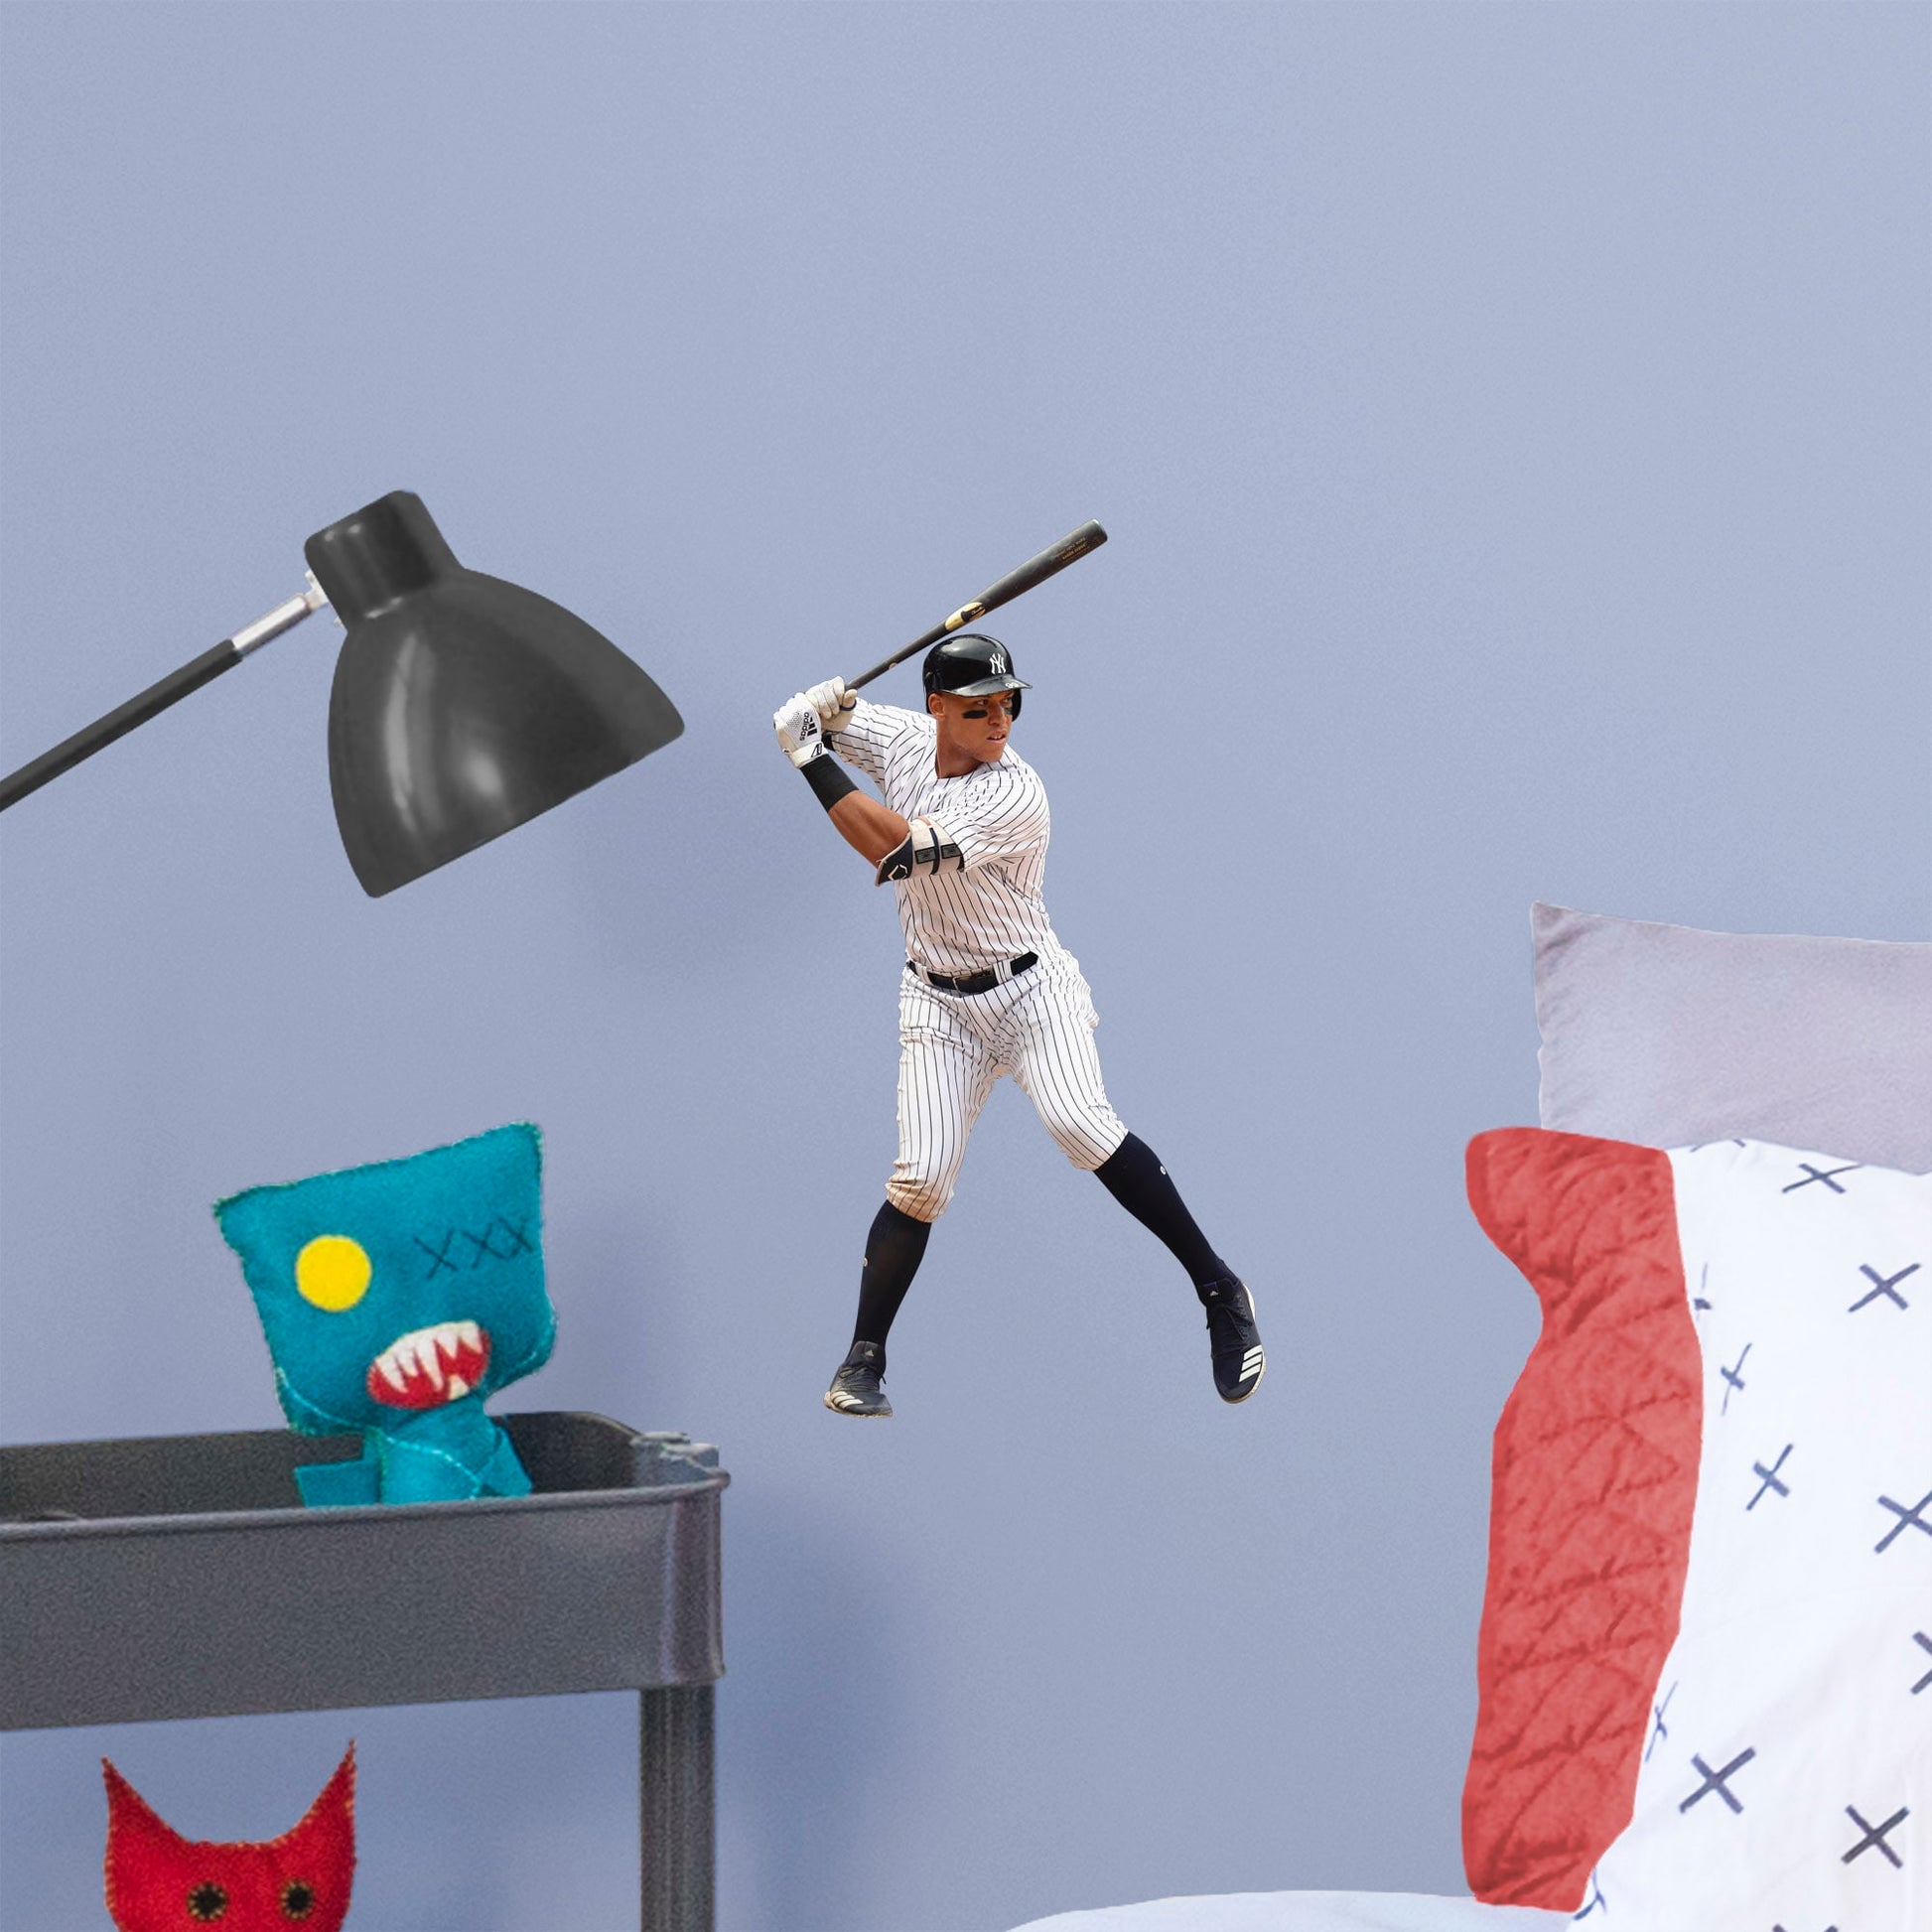 Large Athlete + 2 Decals (9"W x 17"H) Feed your inner sports fanatic with this unique Aaron Judge wall decal. Perfect for unseasoned Yanks or lifelong season-ticket holders, the reusable image of the 2017 Rookie of the Year pick can be moved from room to room with ease. The verdict is in: this adhesive graphic is perfect die-hard fans of The Judge.